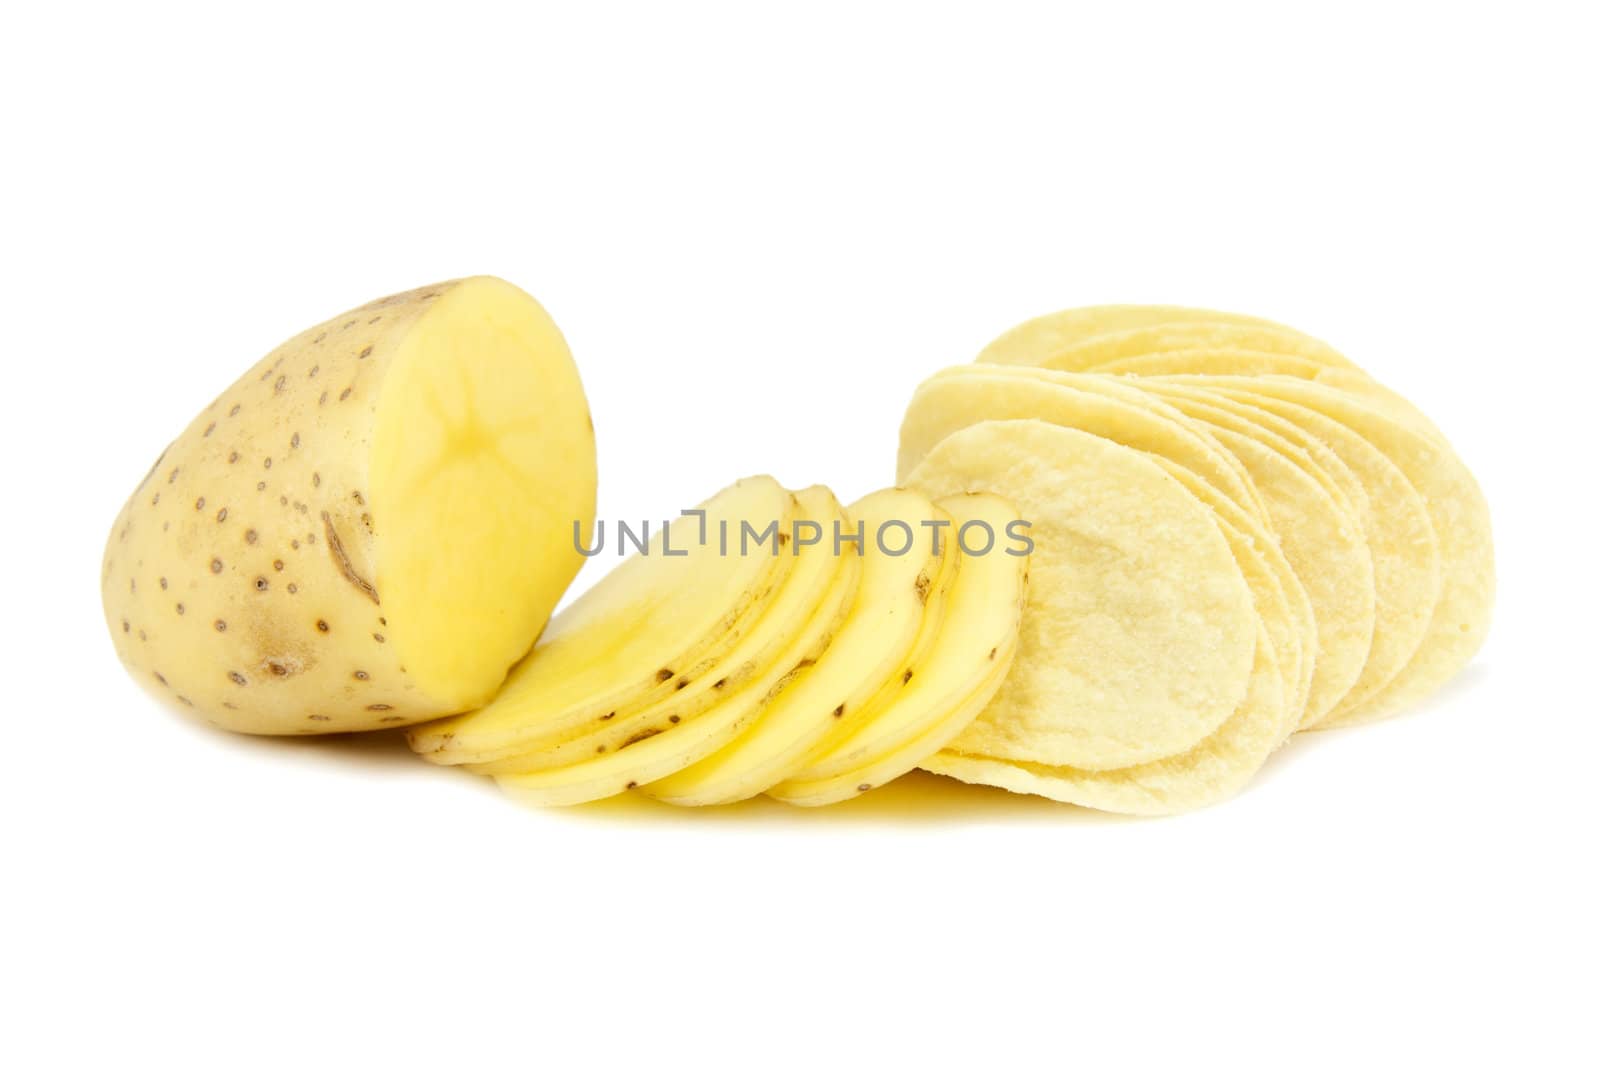 Sliced fresh Potatoes and chips / crisps isolated on a white background